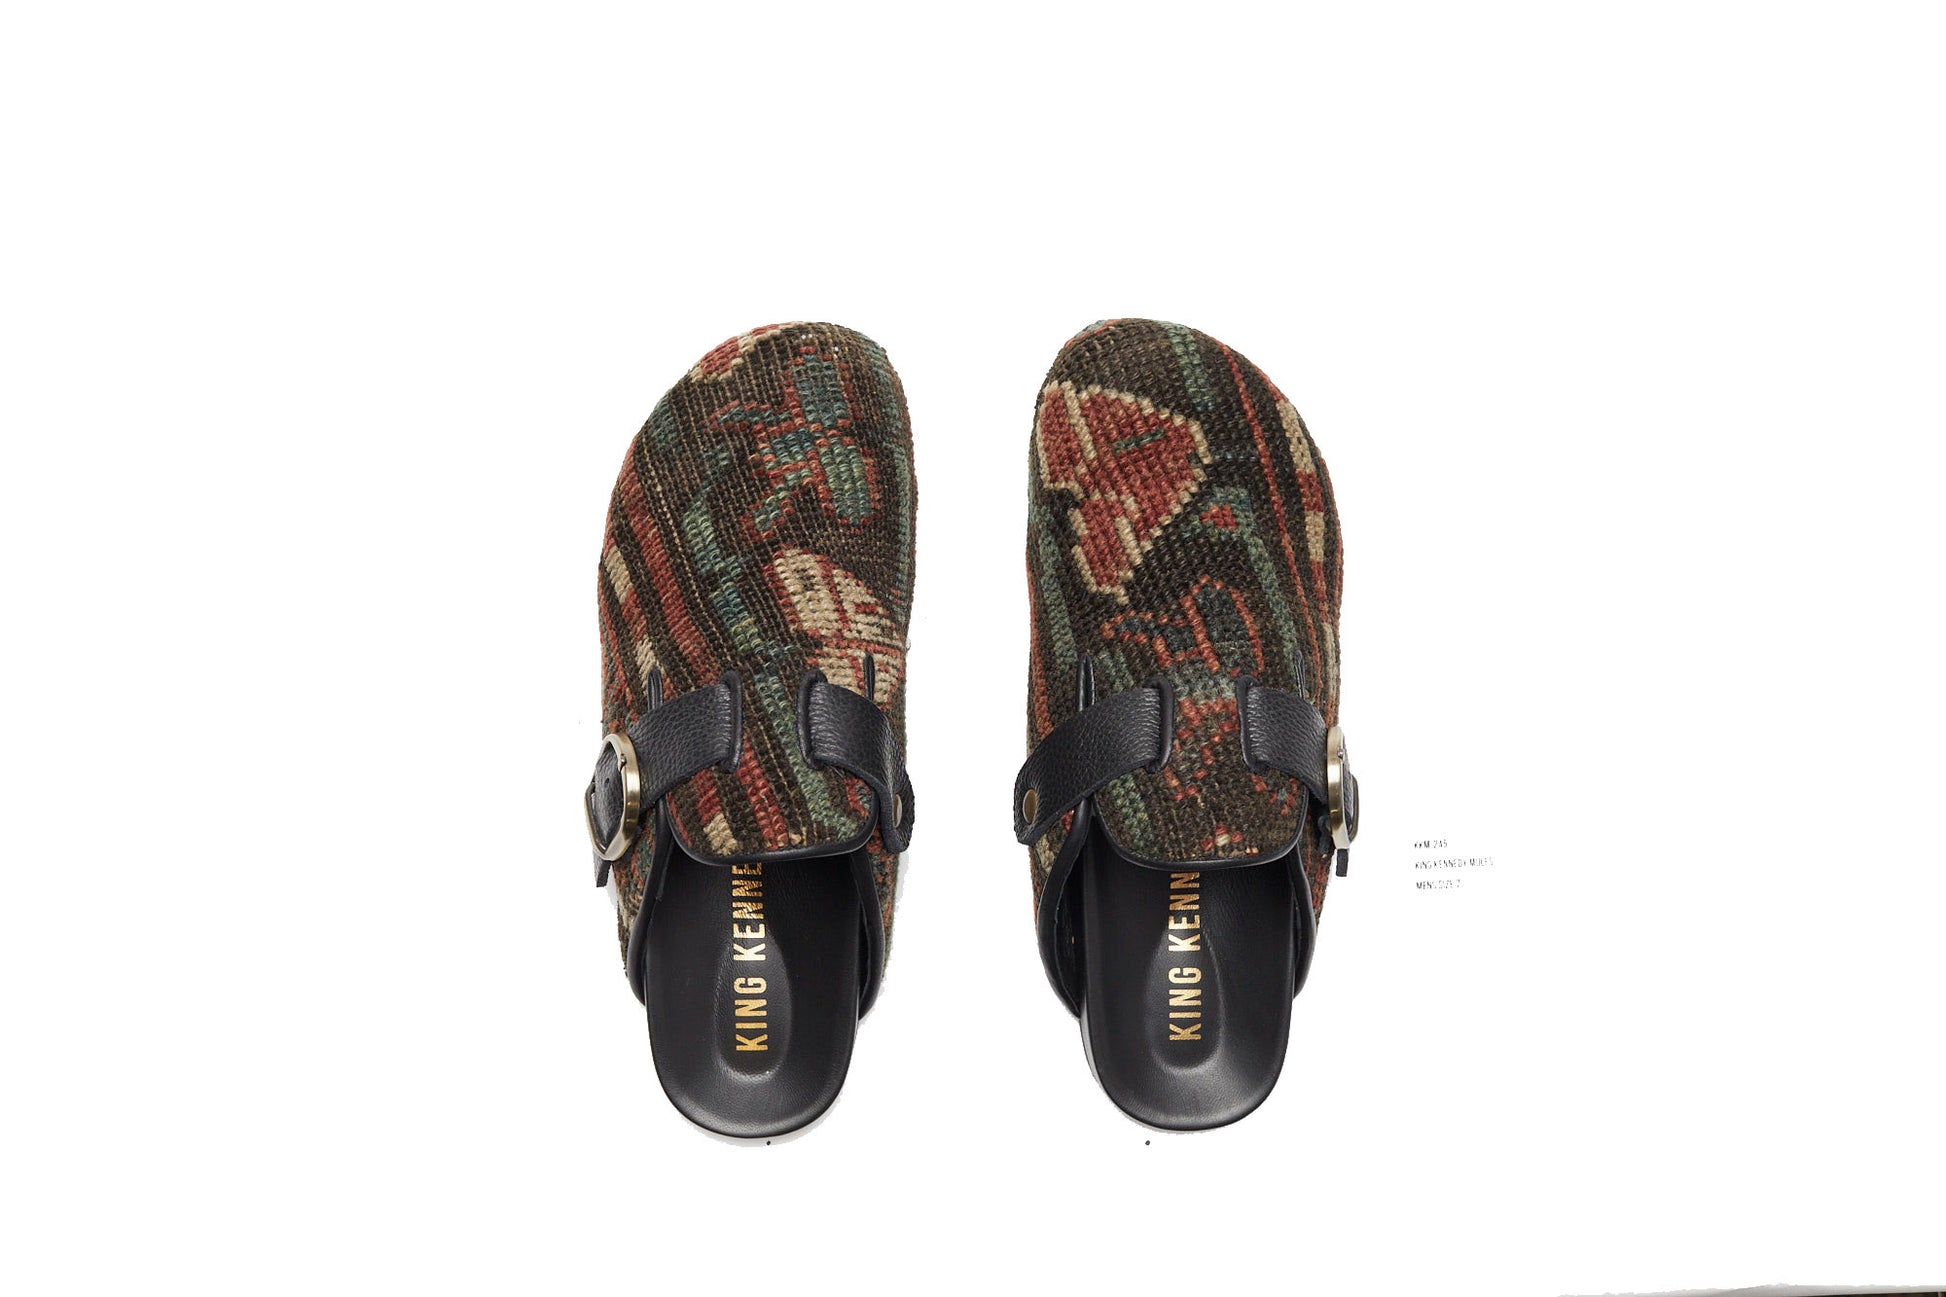 King Kennedy Rug Mules are one-of-a-kind and made of 100 year old antique Persian rug fragments with soft lambskin footbed and rubber sole. This pair is made of an antique Persian rug with patterns in deep earth tones of brown, green, cream and pale red. Made in Los Angeles.